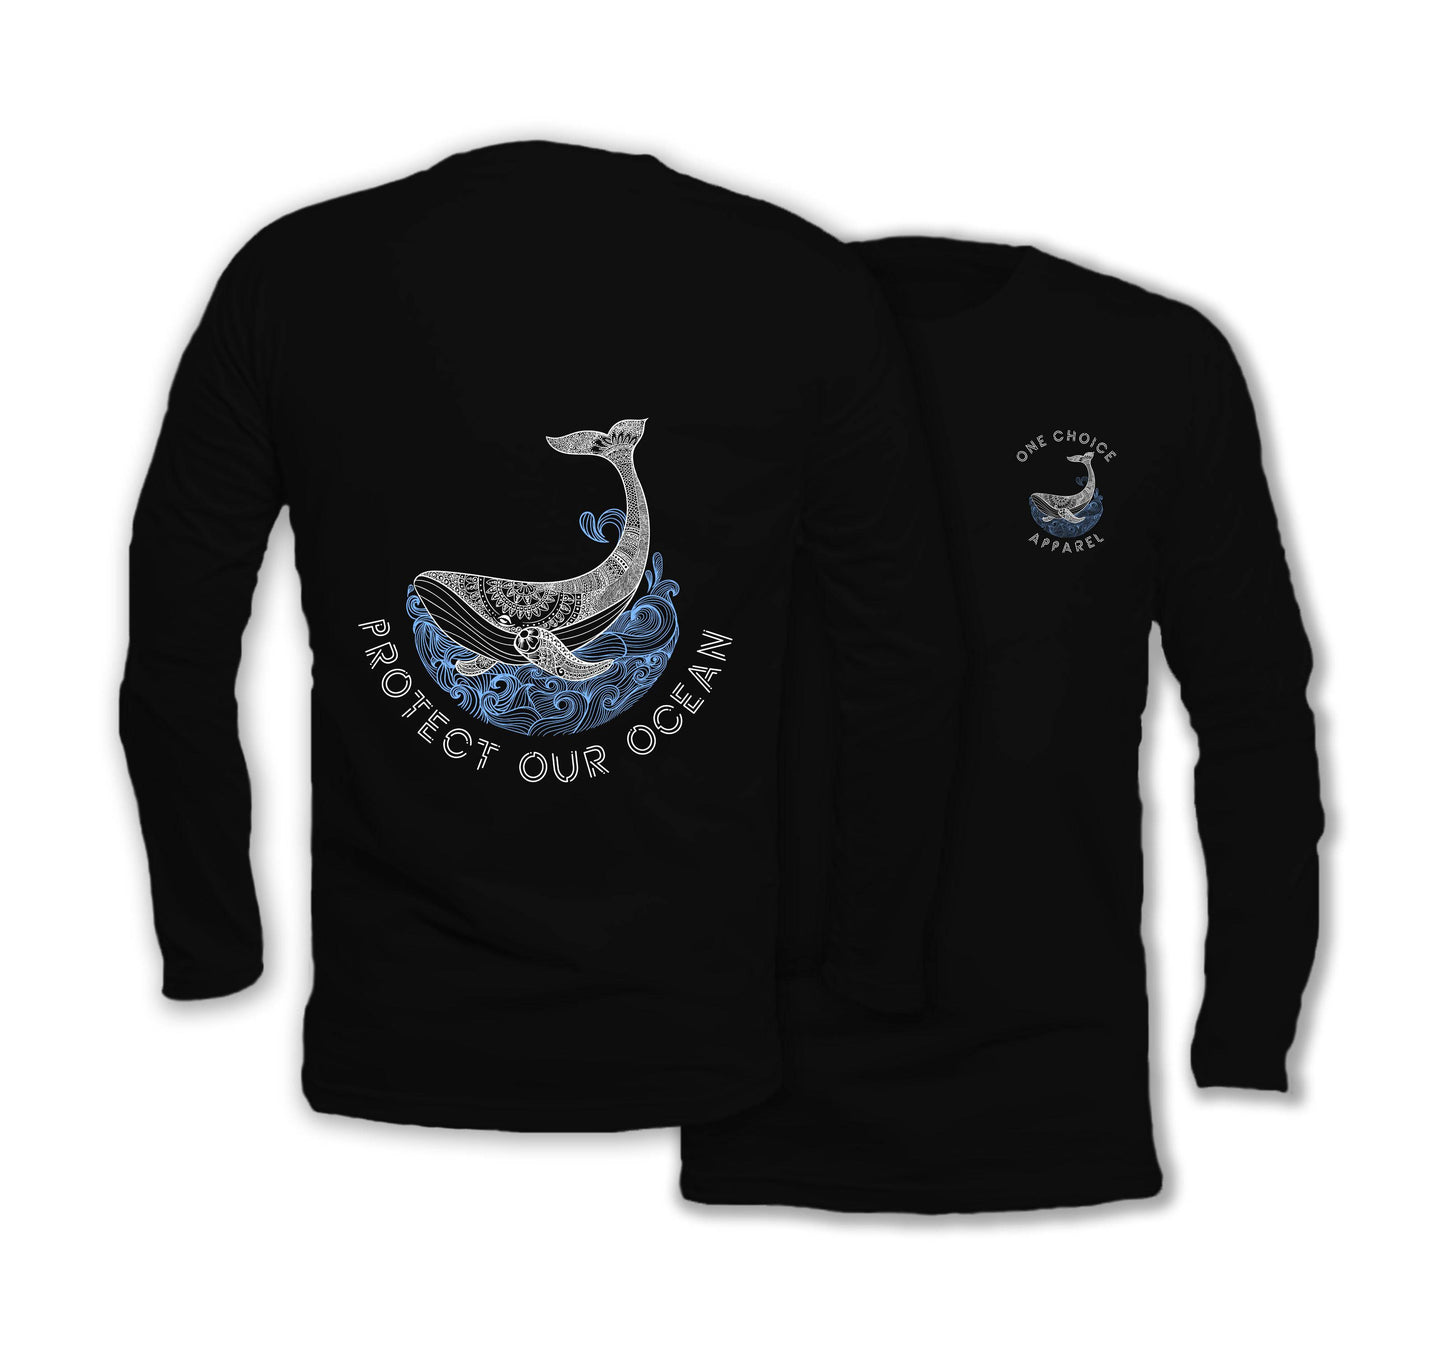 Protect Our Ocean - Long Sleeve Organic Cotton T-Shirt - One Choice Apparel